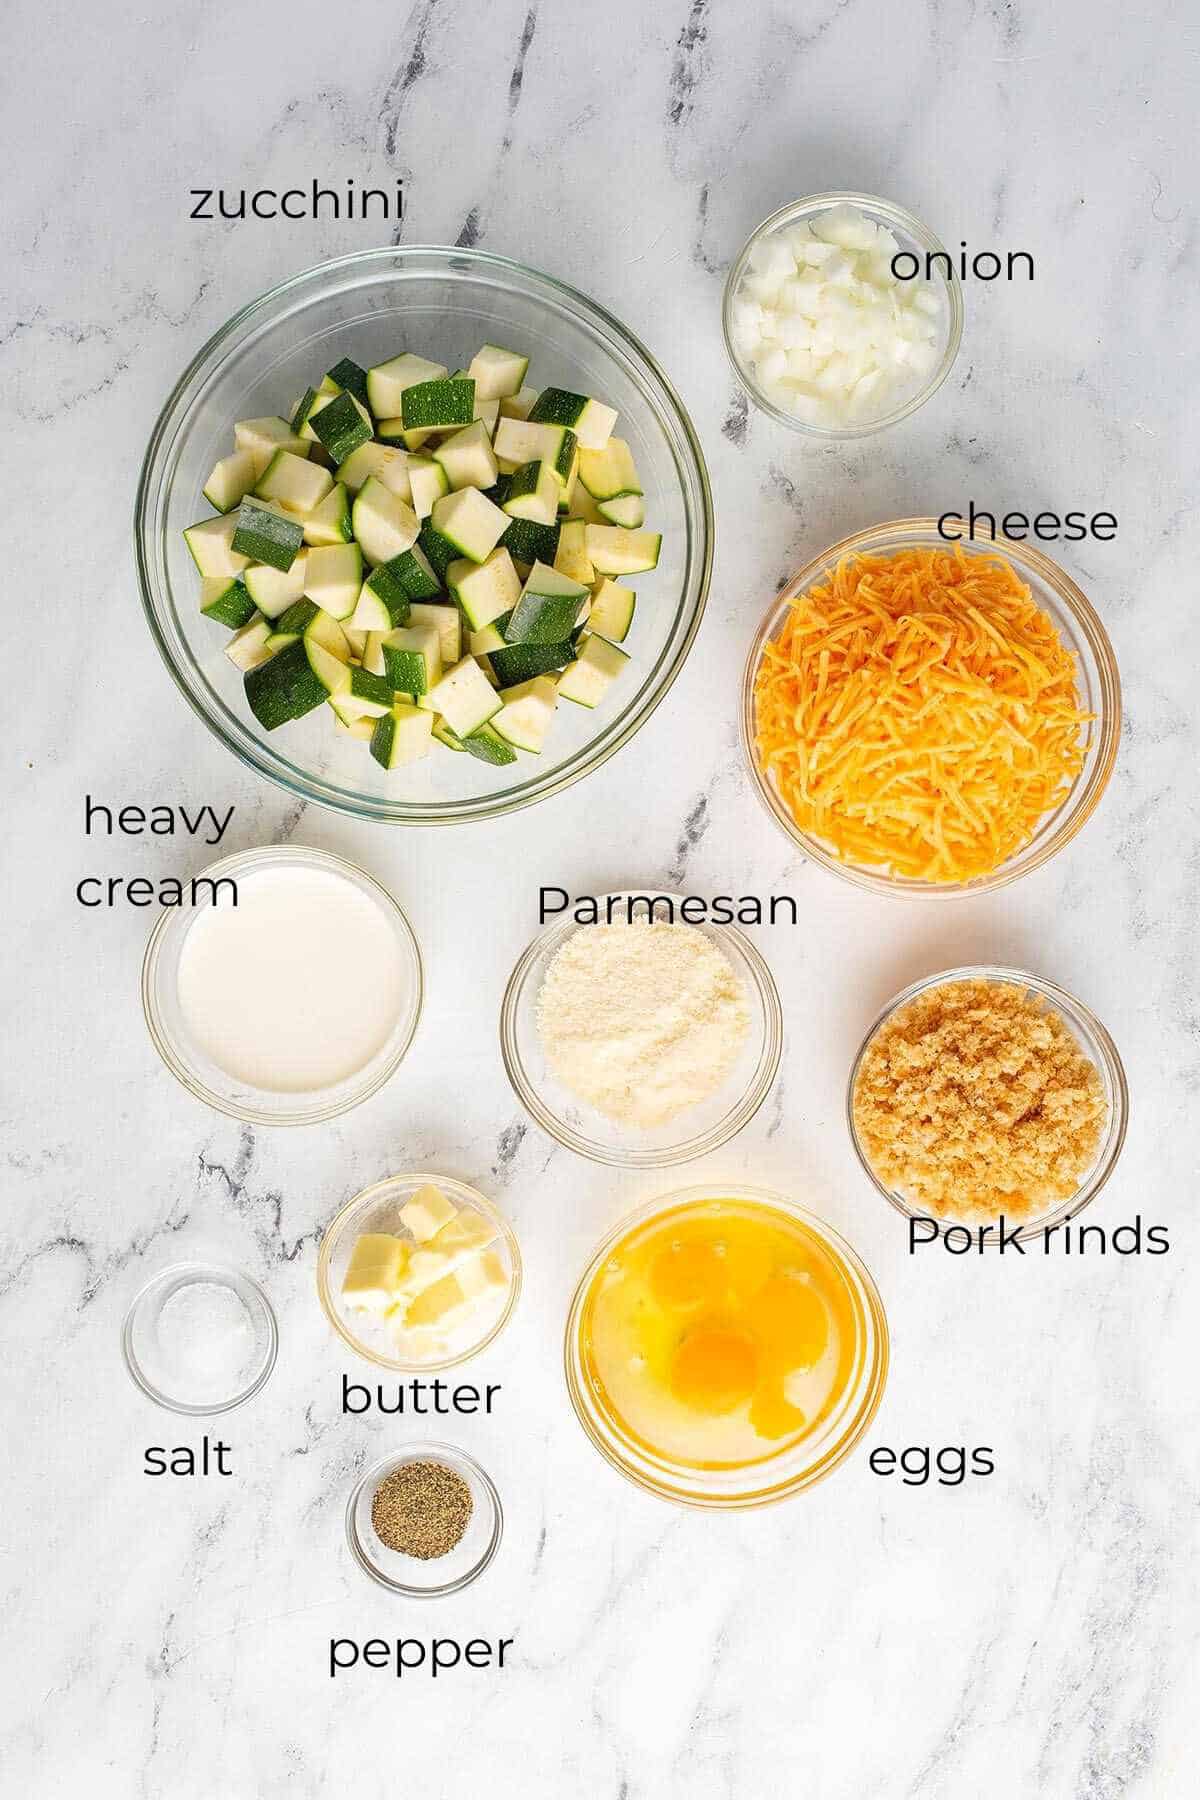 Top down image of the labeled ingredients for easy zucchini casserole.